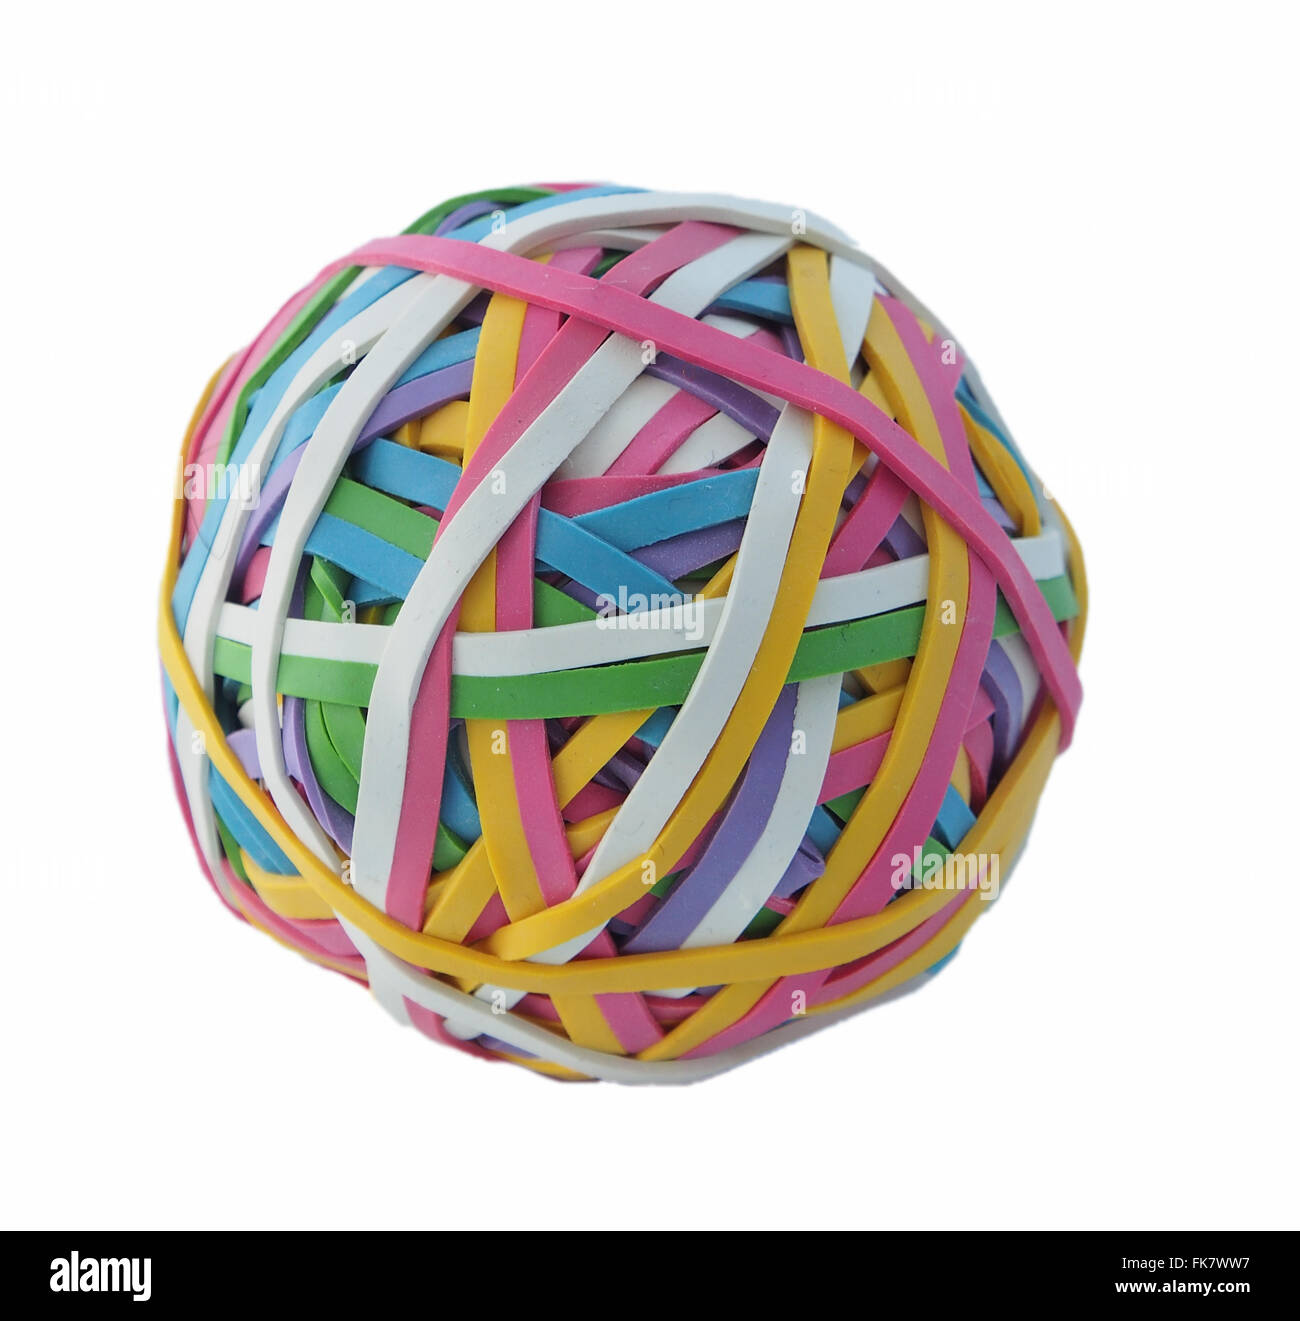 Ball of colourful elastic rubber bands, studio shot isolated on a white background. Stock Photo